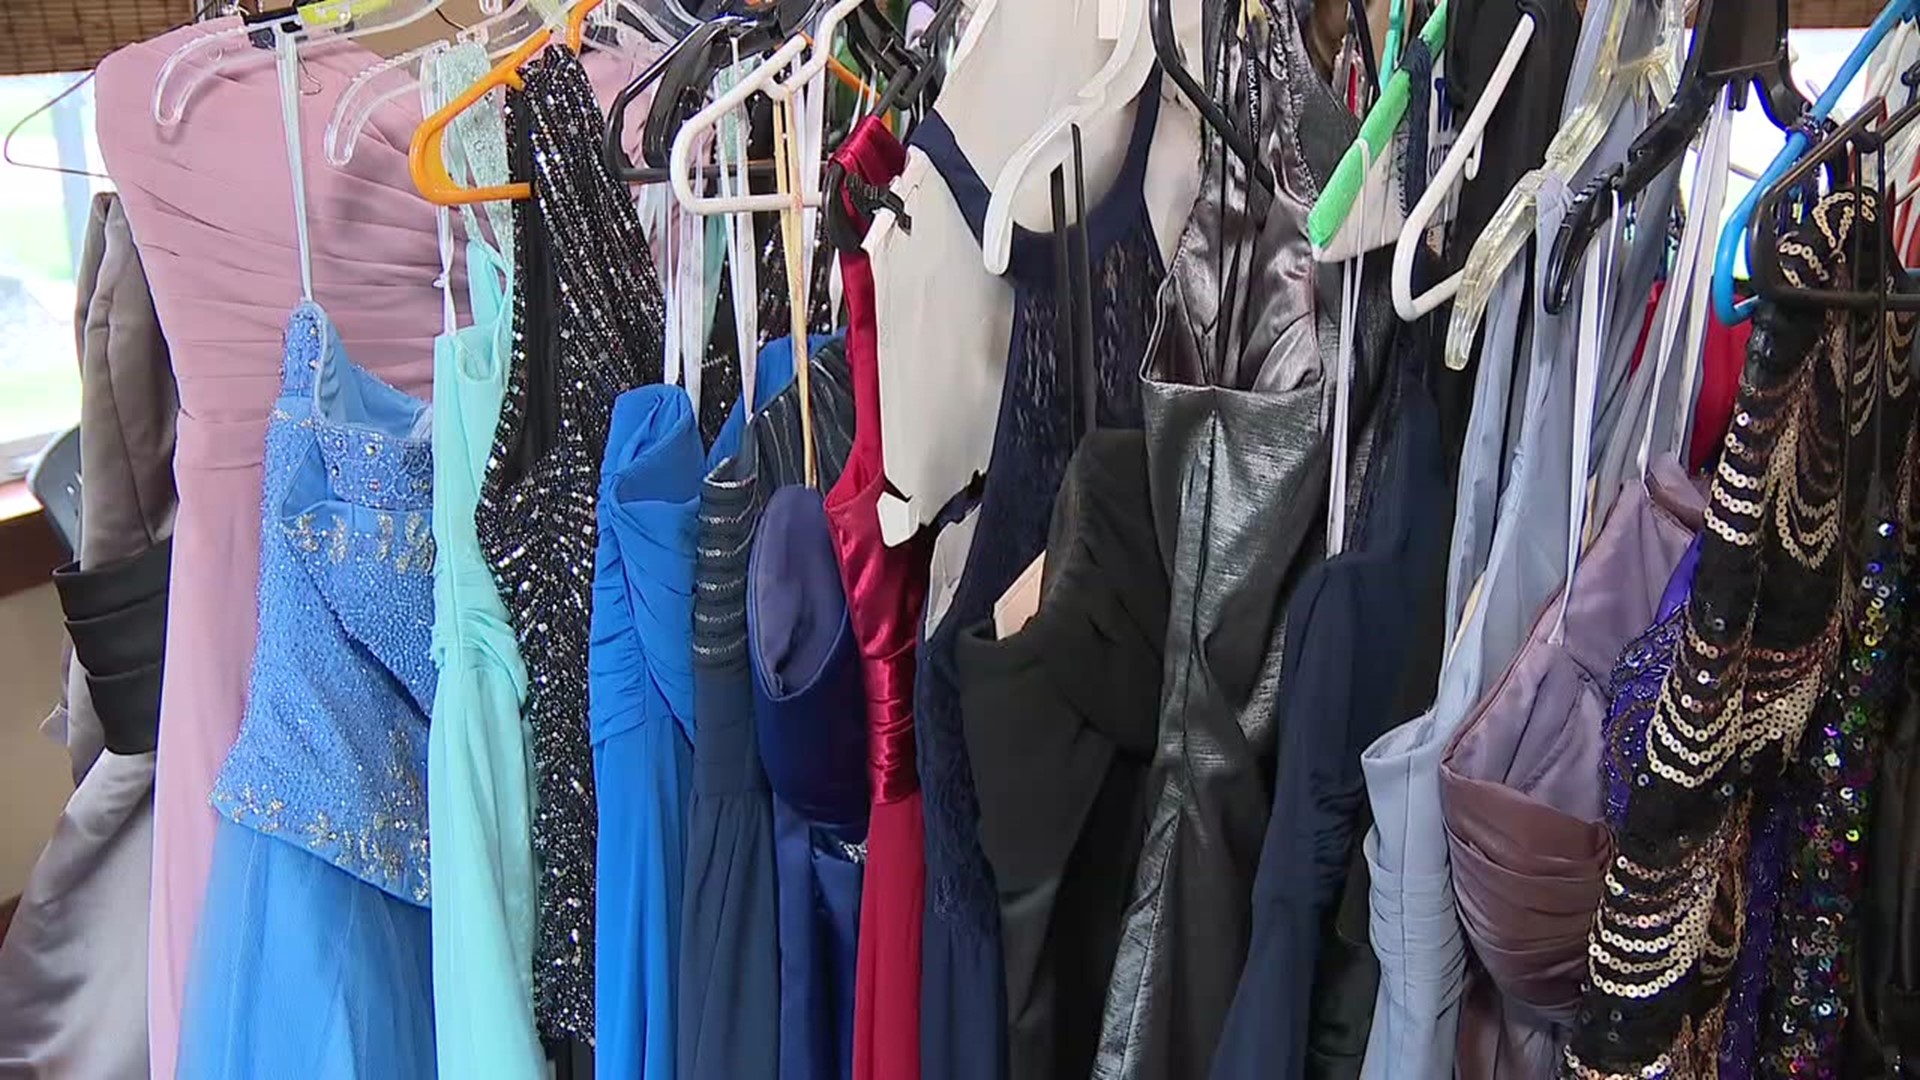 Free prom dress event in Columbia County | wnep.com